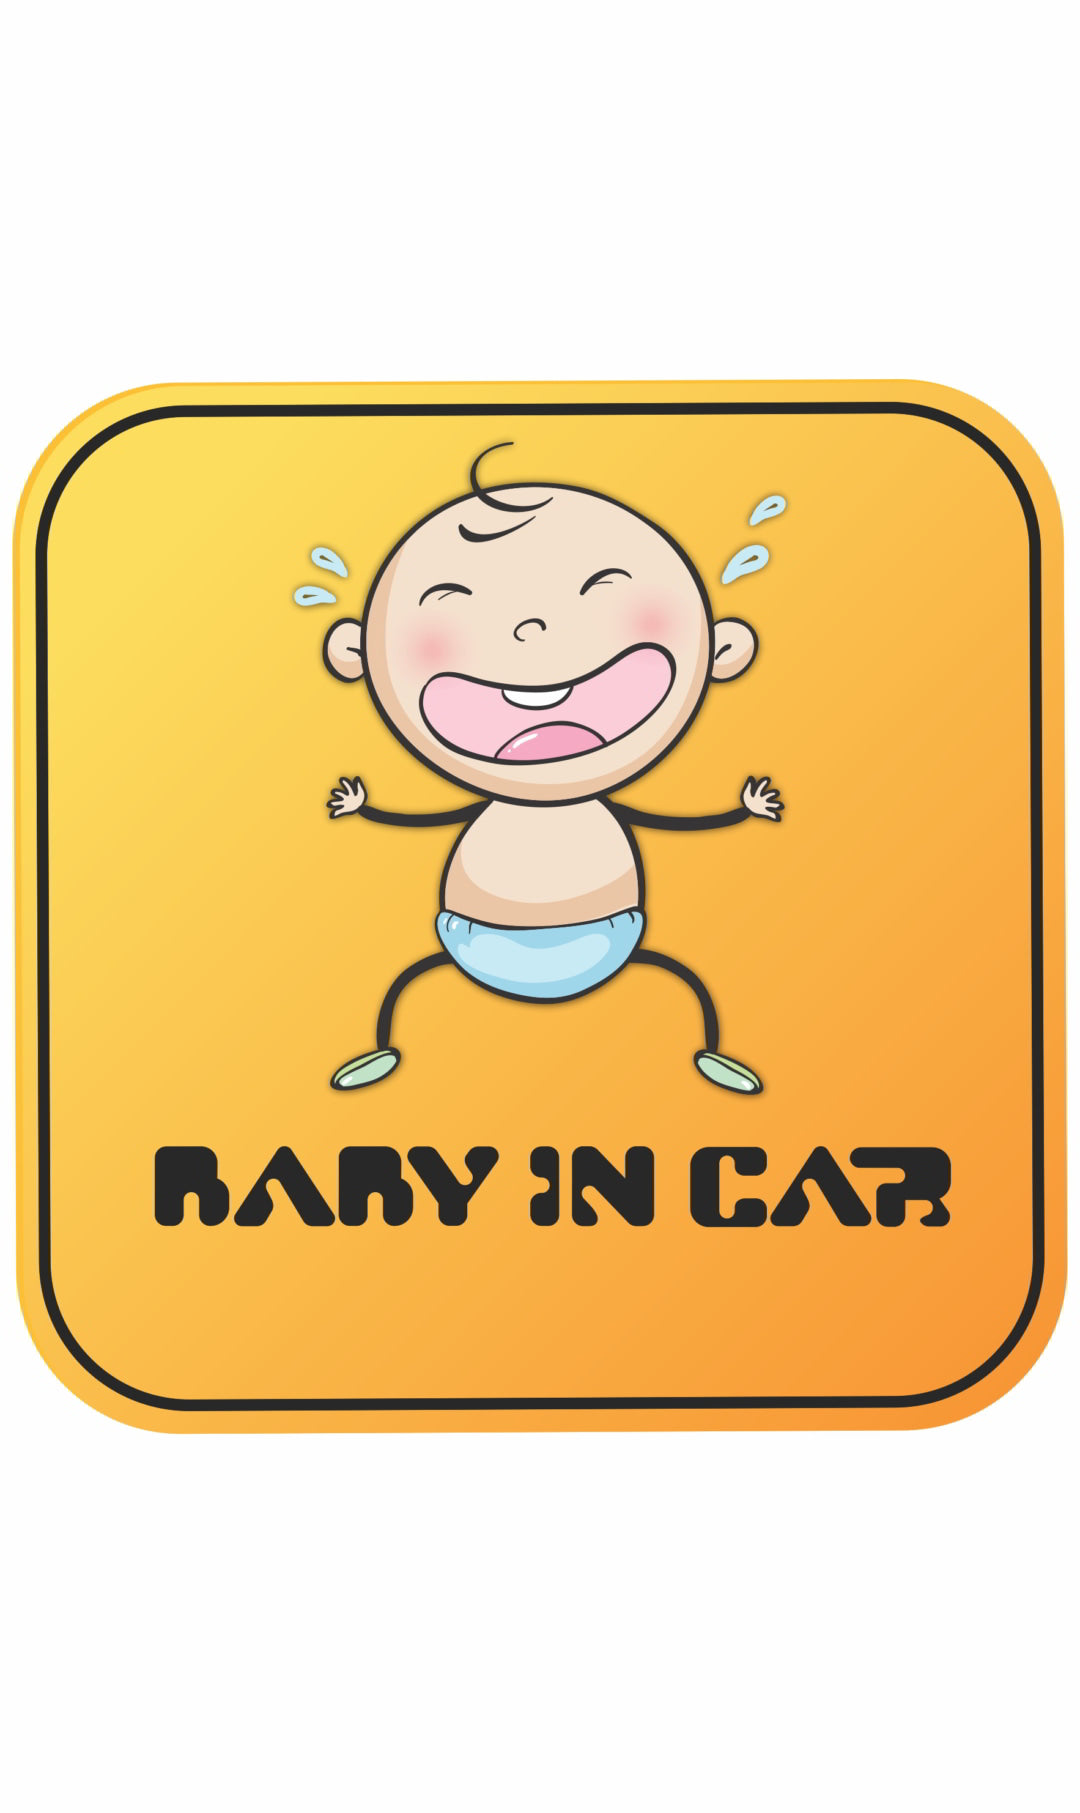 Baby in Car Decal Sticker(2pc)_c7